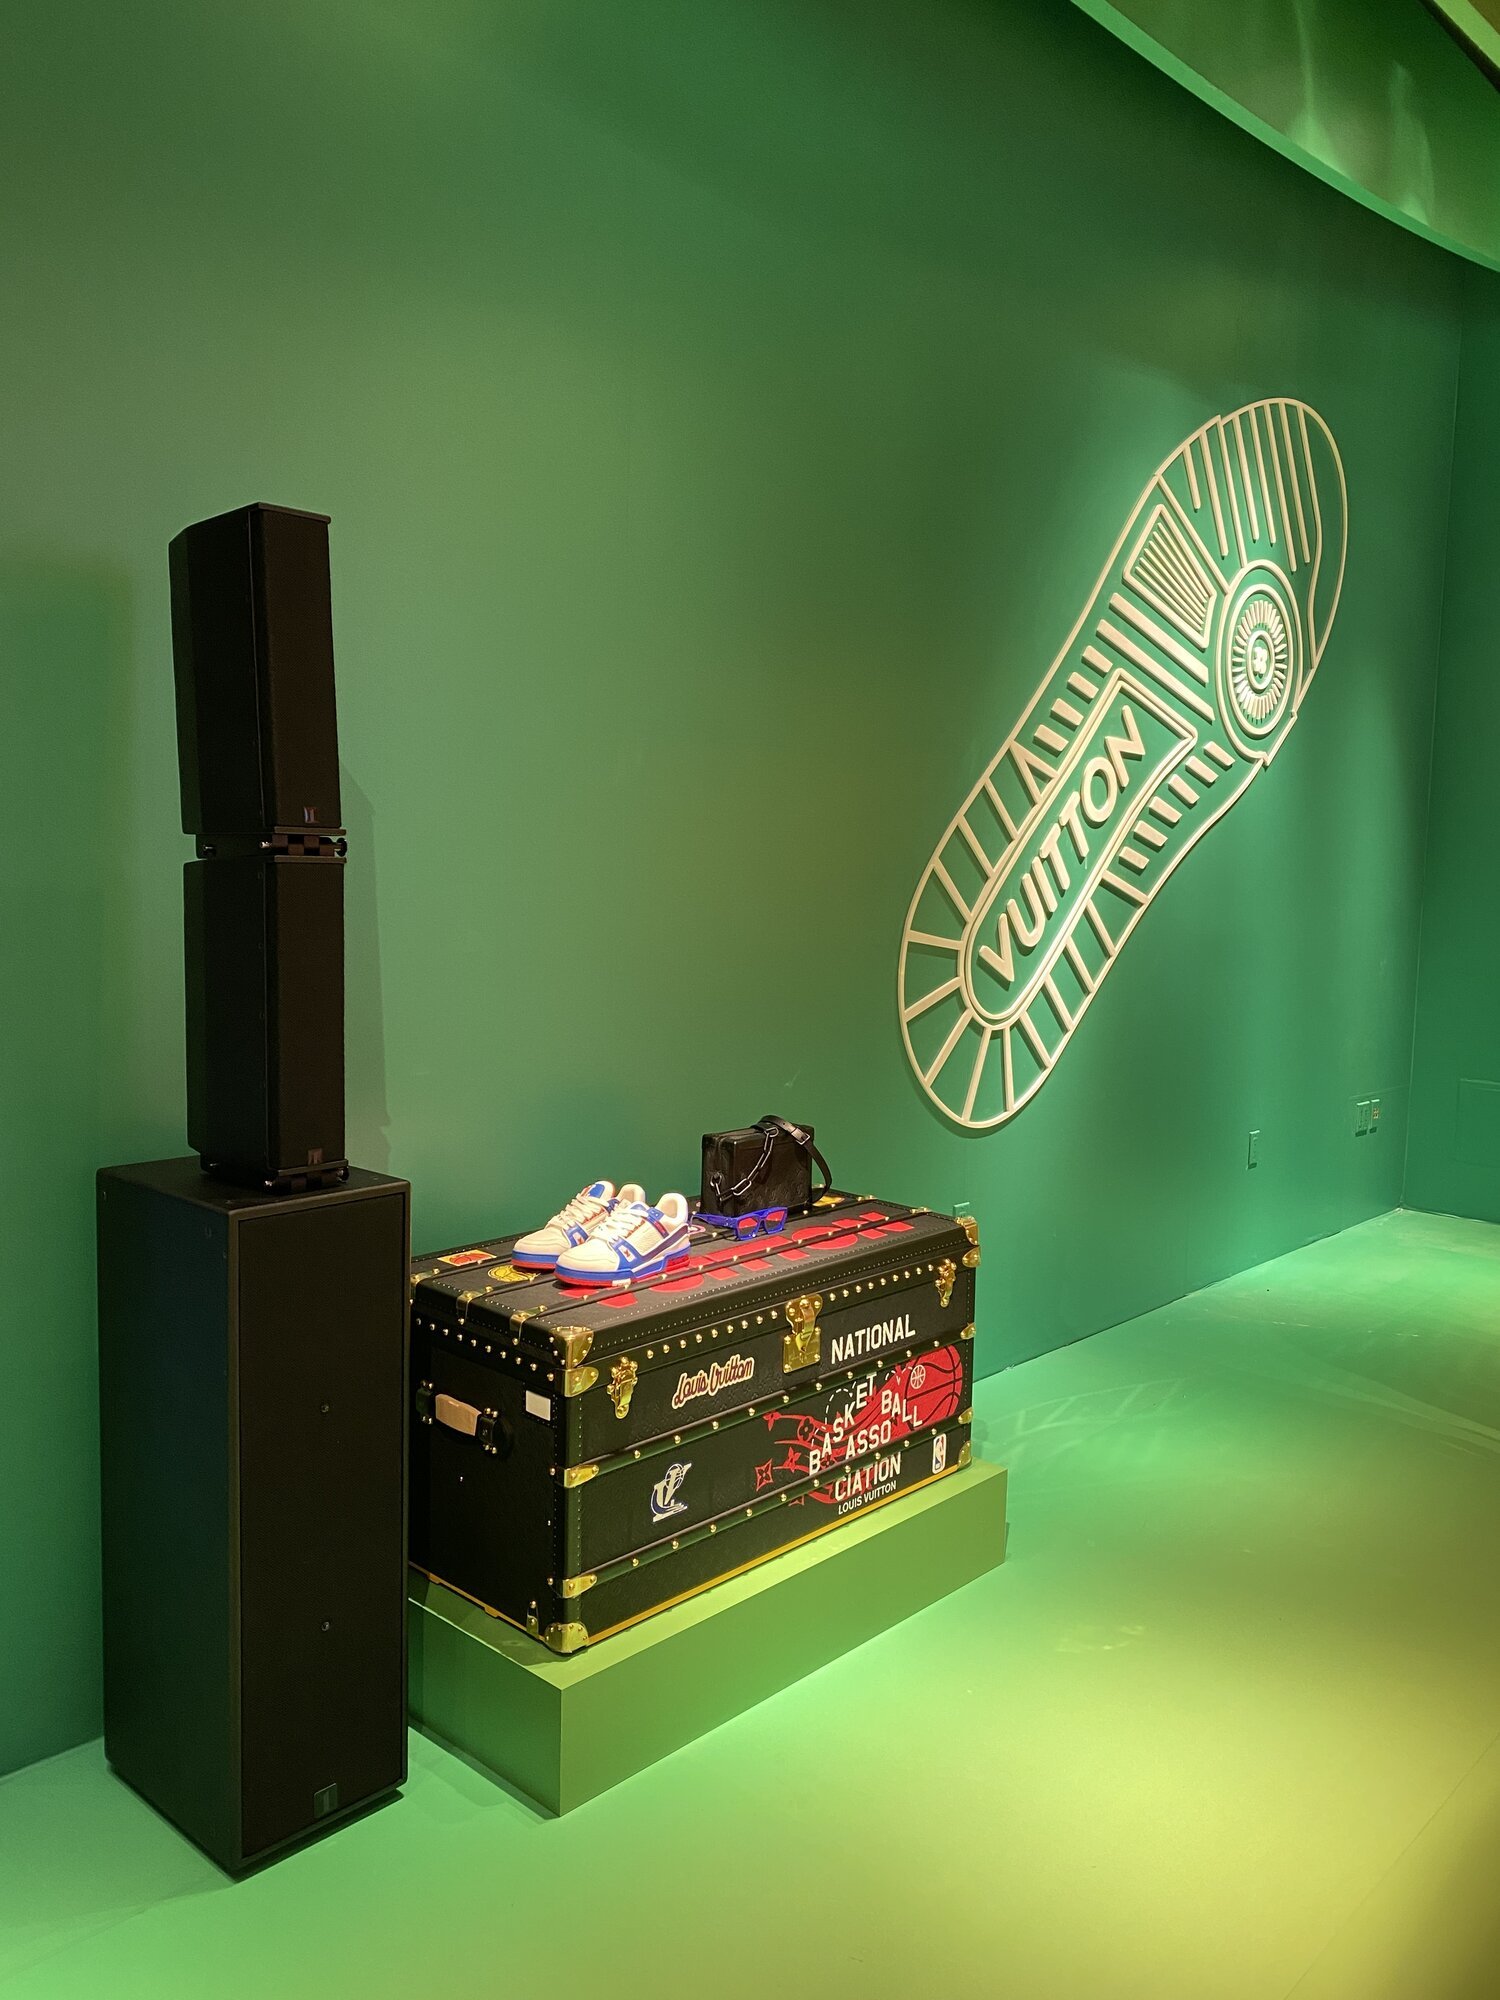 Louis Vuitton SoHo Store Chooses 1 SOUND Tower LCC44's and